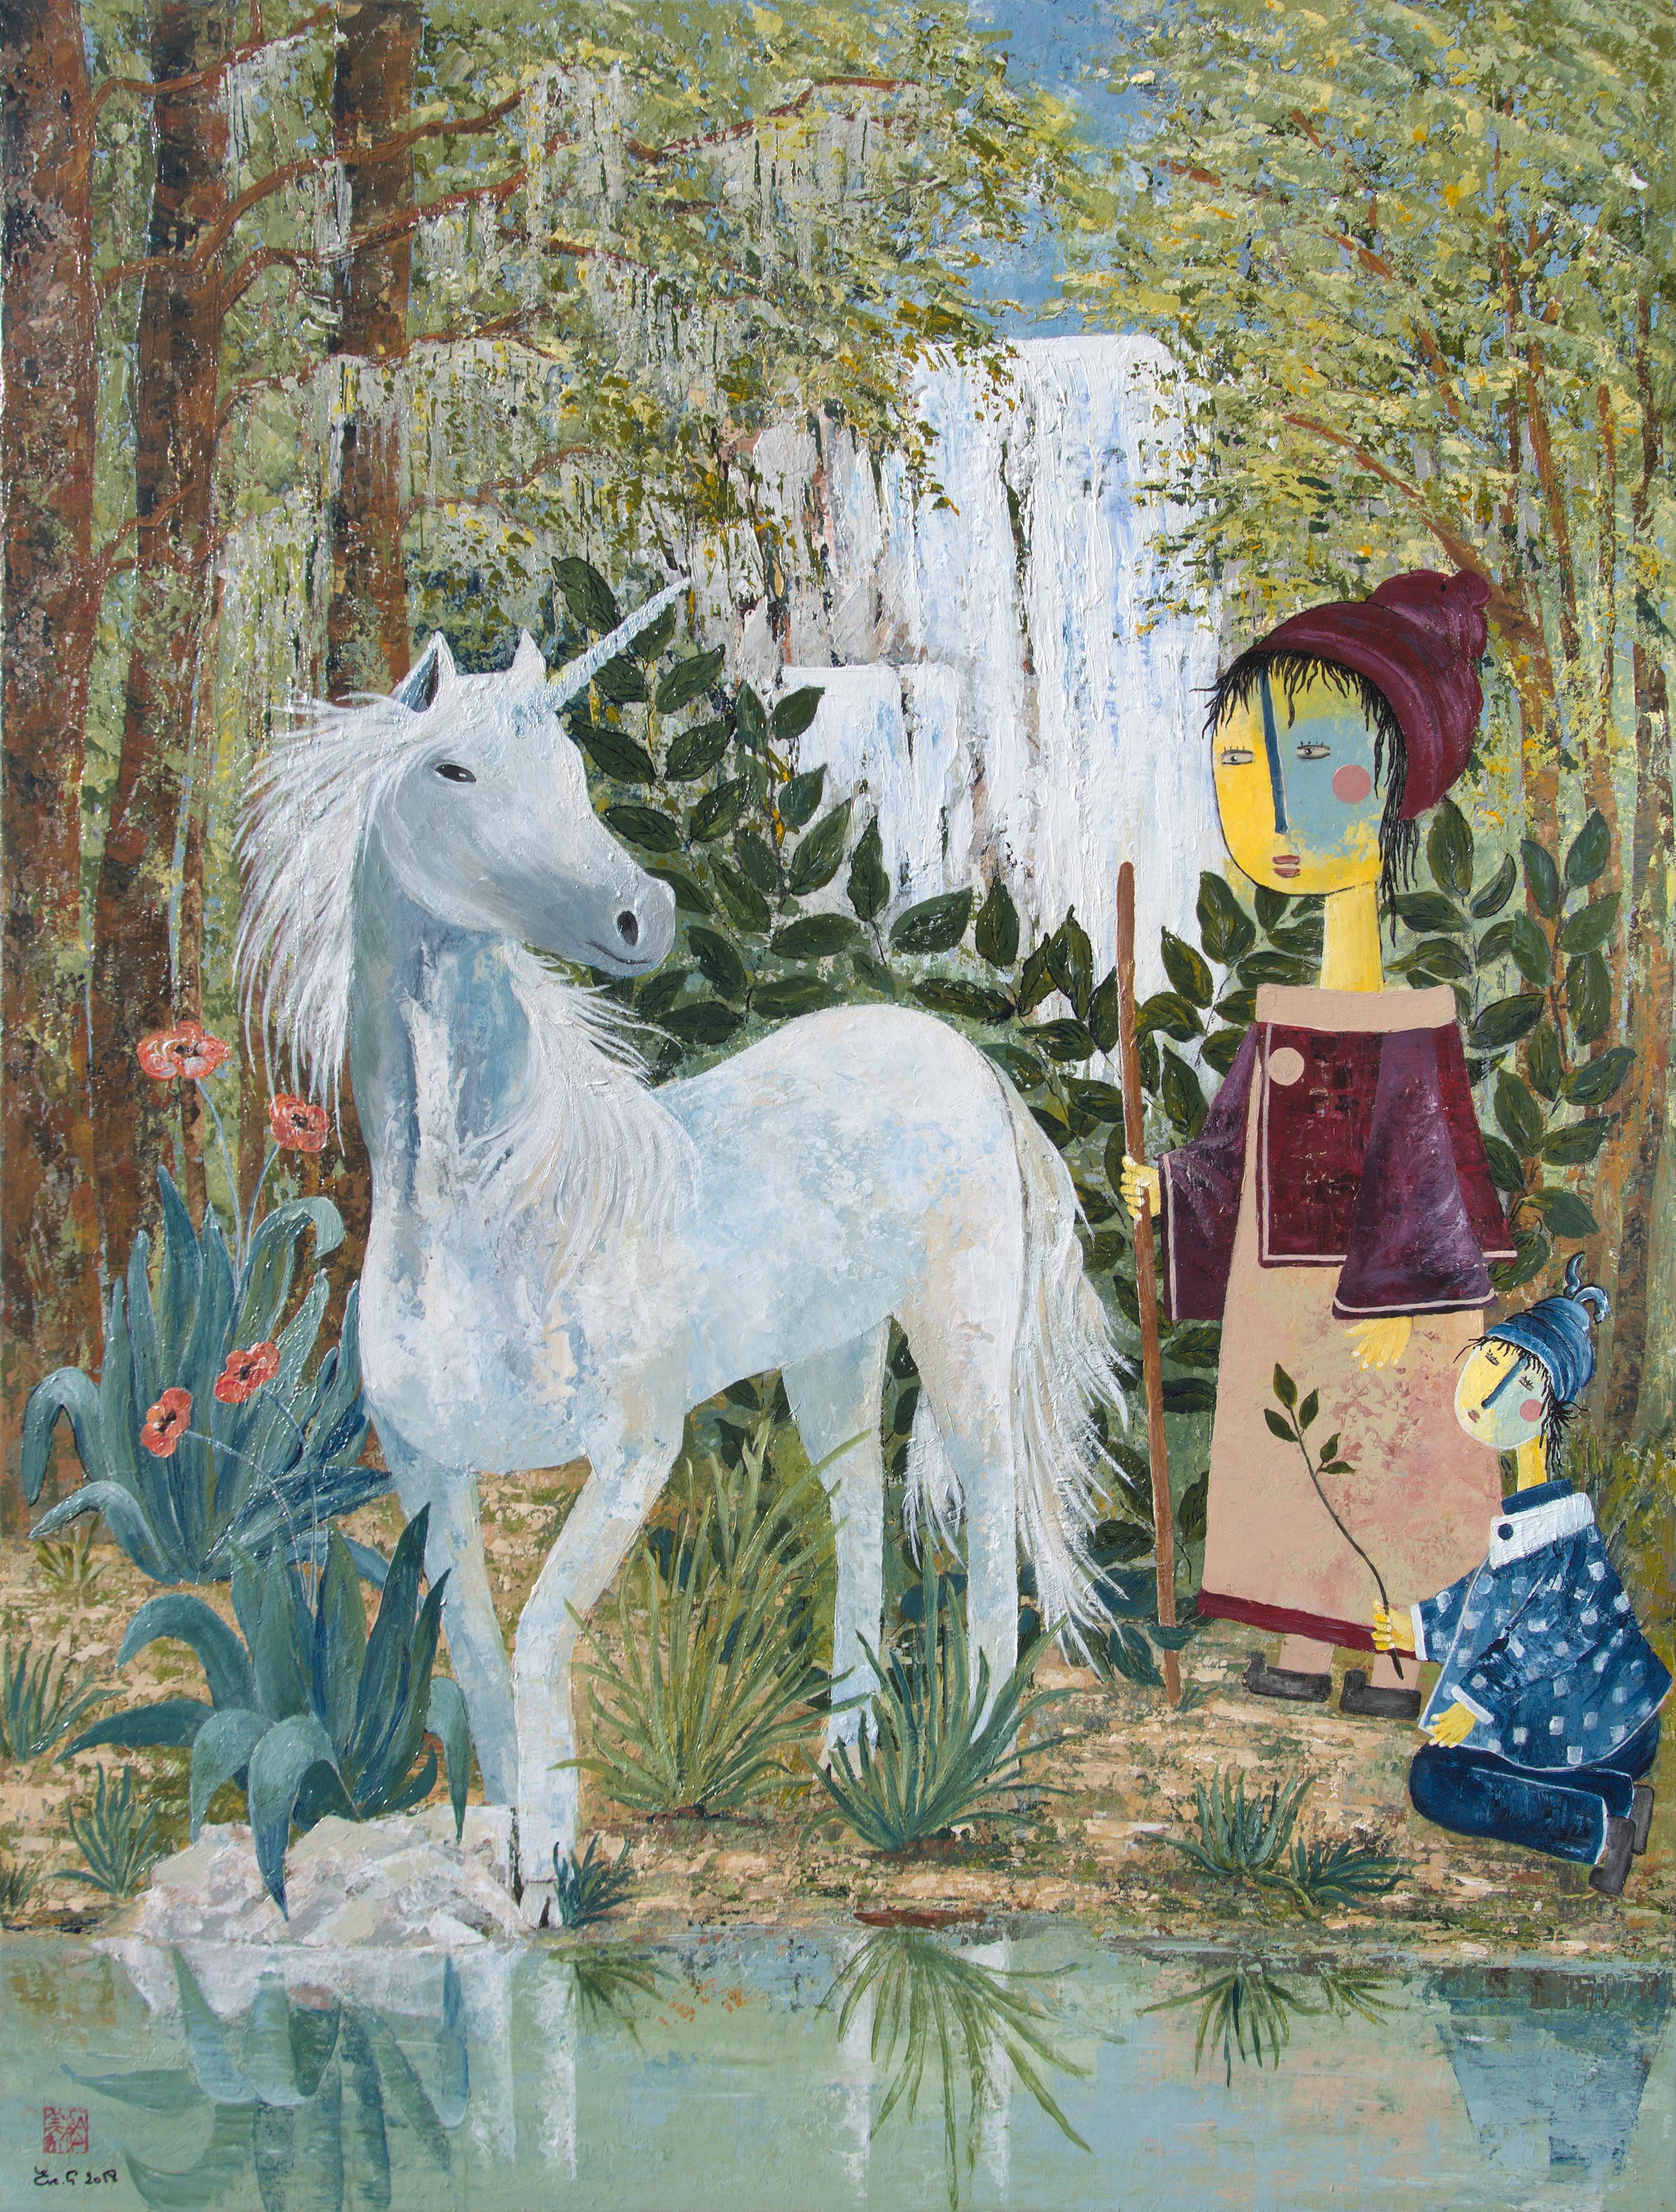 Eve Grenet Figurative Painting - "The Unicorn",  Figurative Landscape with Children in a Poetic Manner 